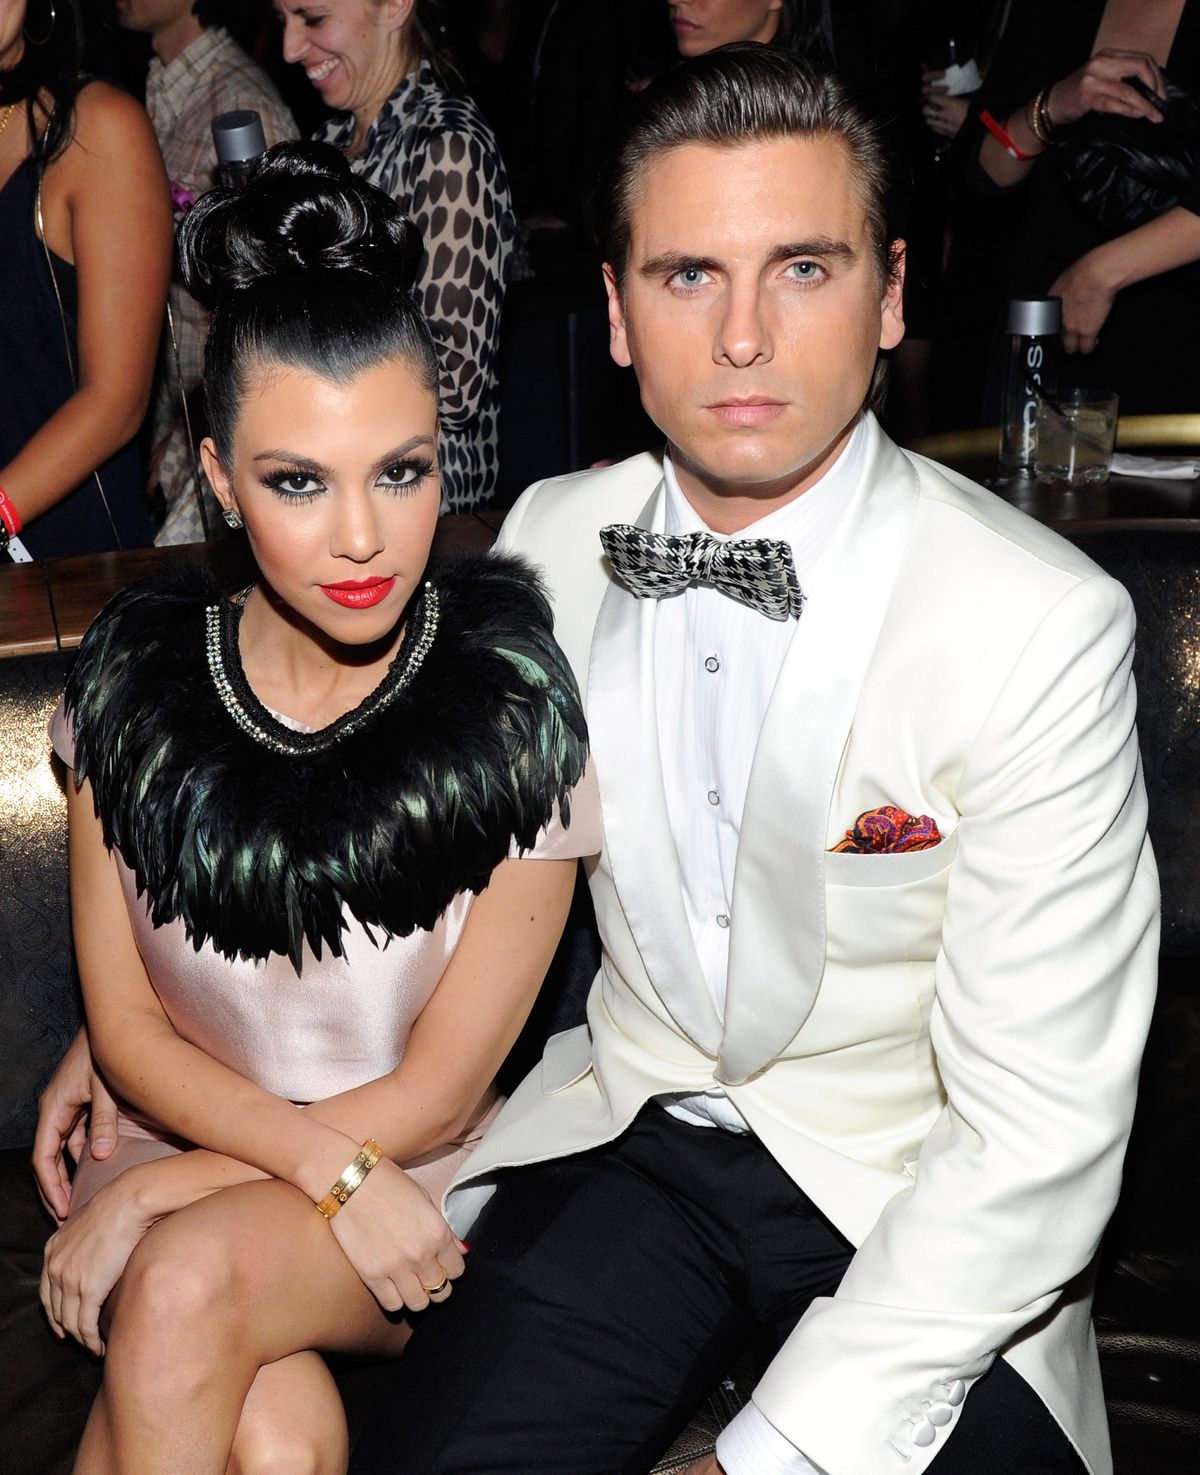 Kourtney Kardashian and Scott Disick attend the launch of AG Adriano Goldschmied’s “backstAGe presents:” initiative at the Cosmopolitan in Las Vegas in 2011.